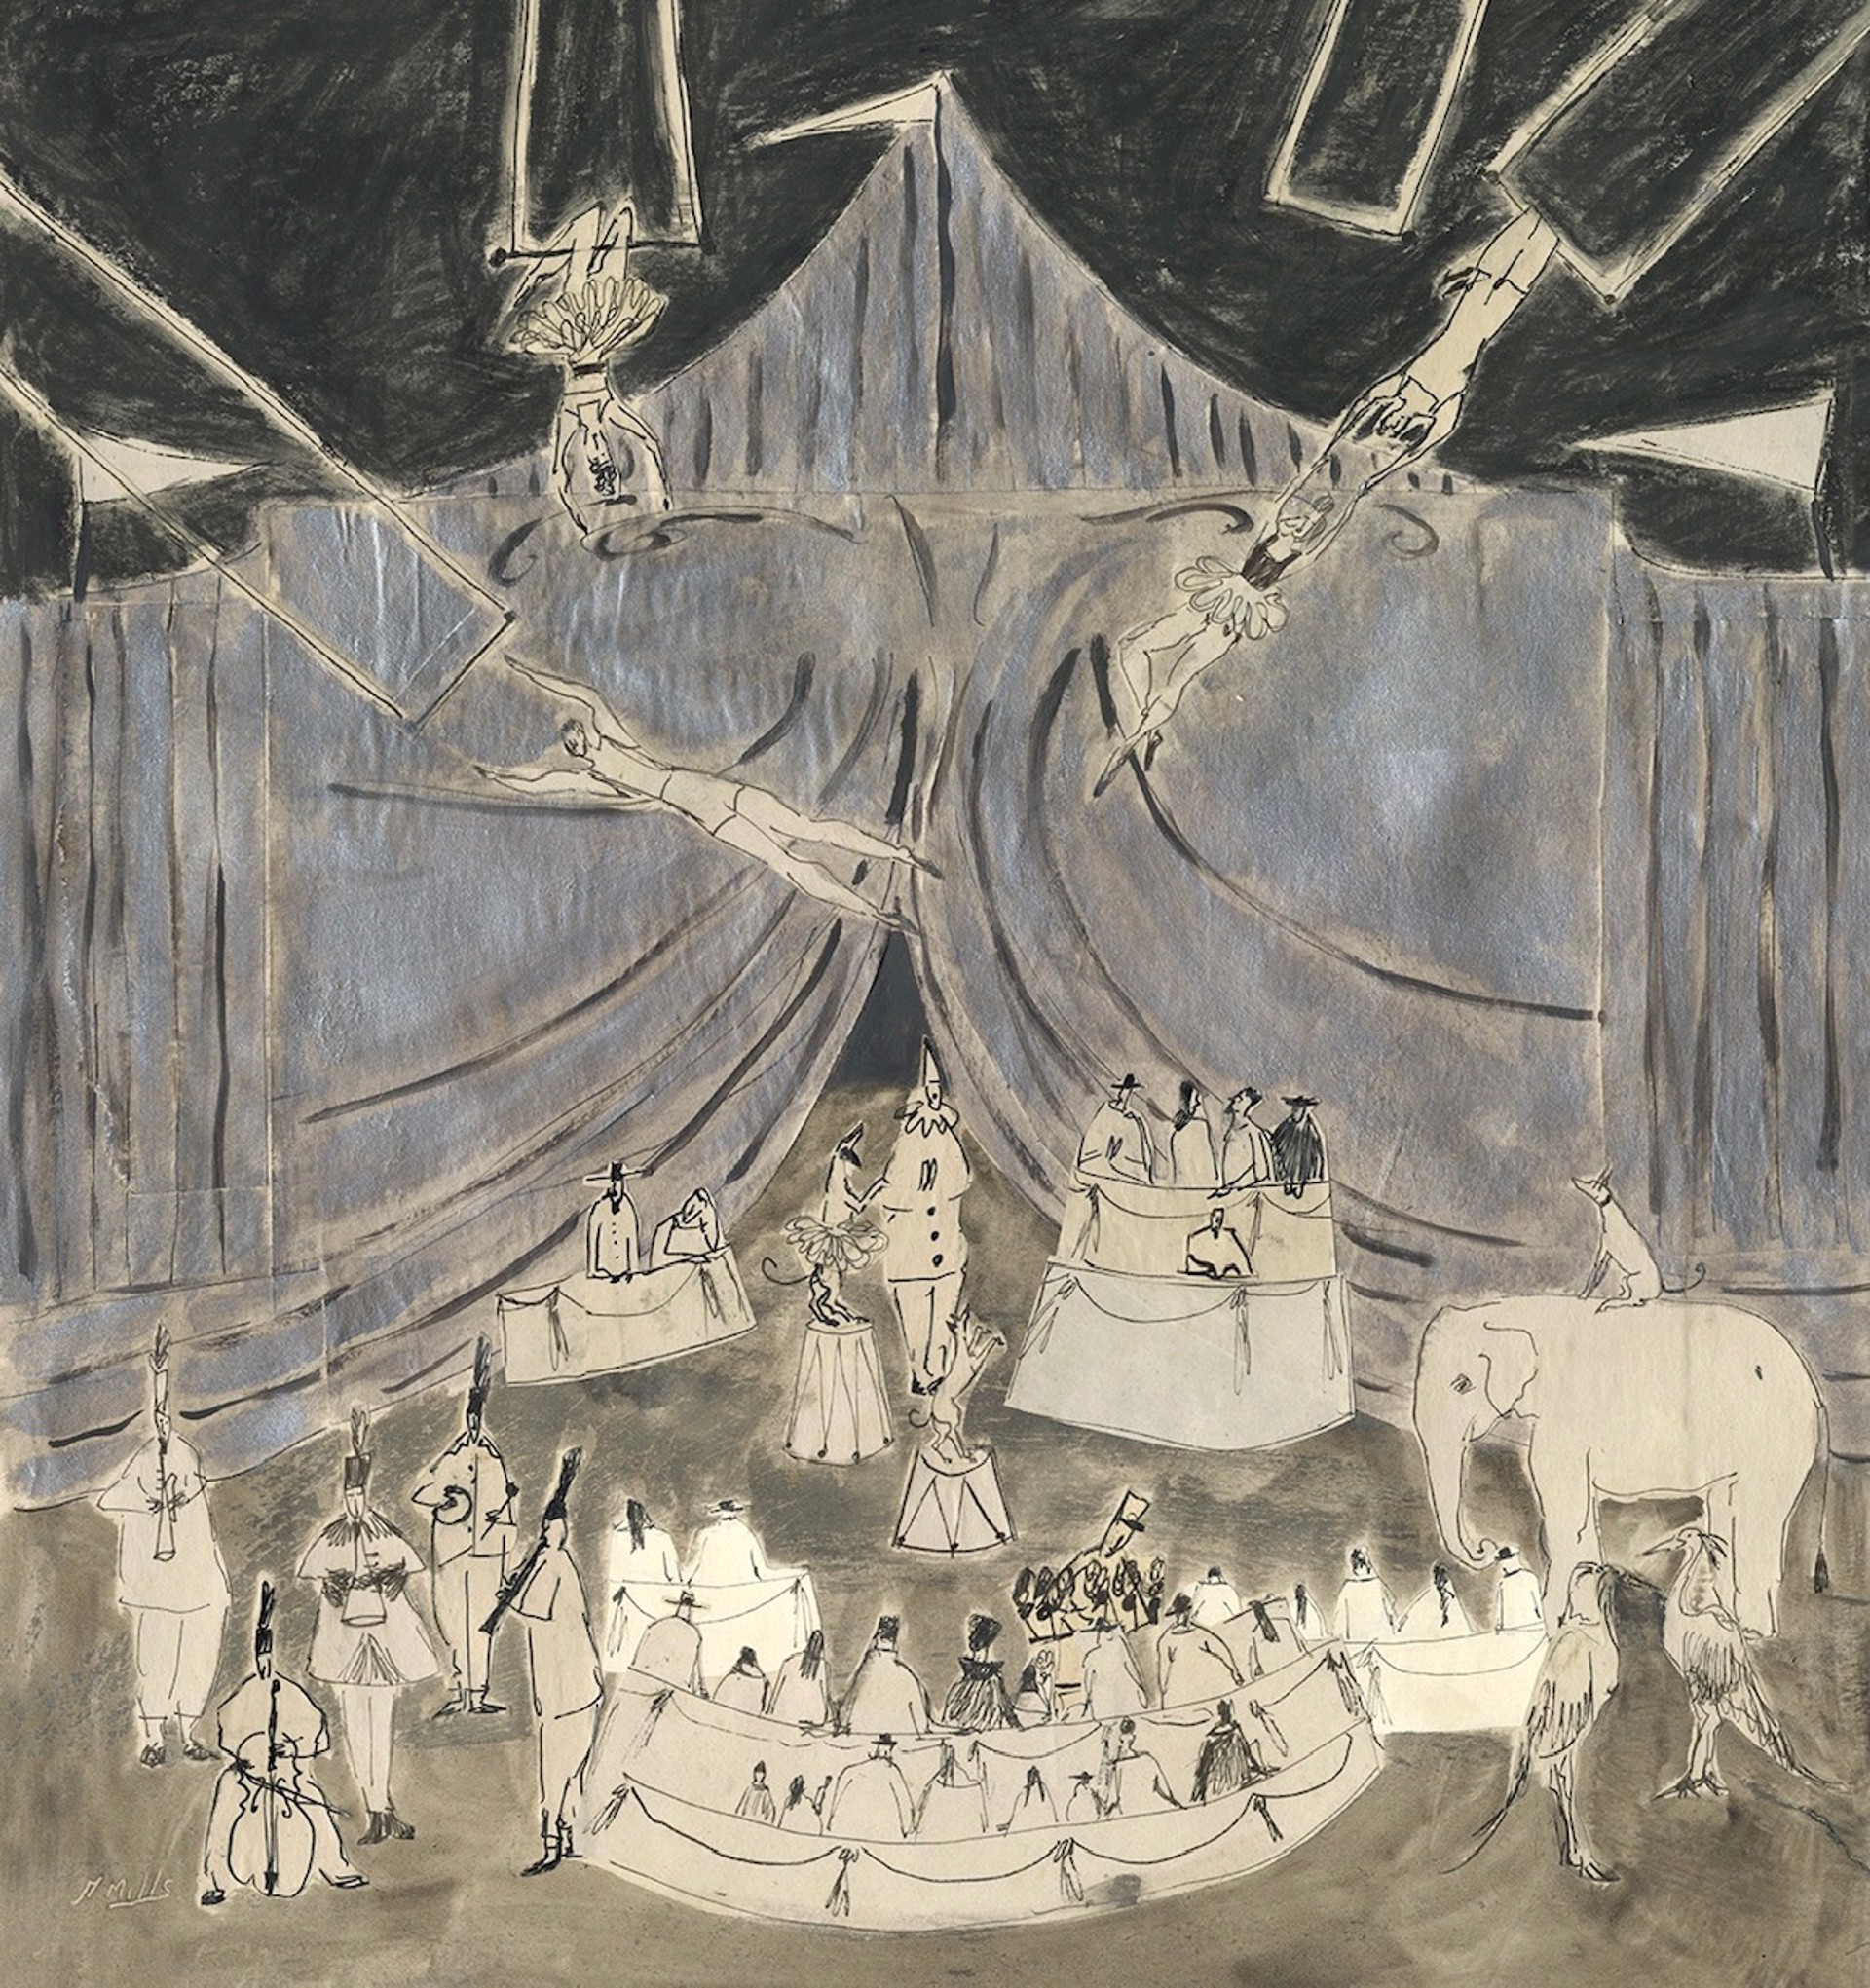 Circus/High Above The Center Ring by Gigi Mills